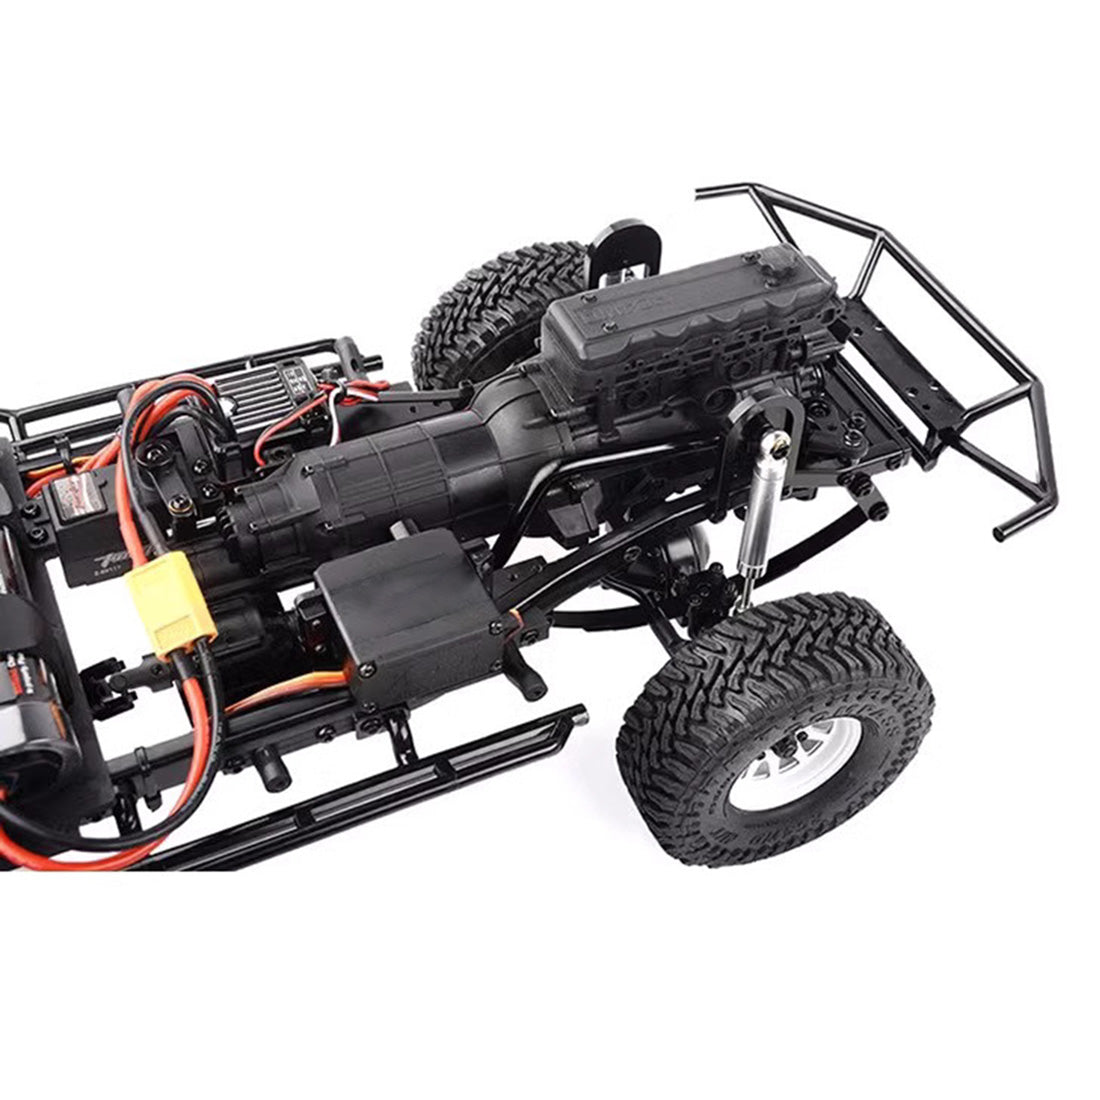 Engine Model for 1/10 RC TF3 4WD Climbing Car Collectible Ornament Vehicle Toy Modification enginediyshop